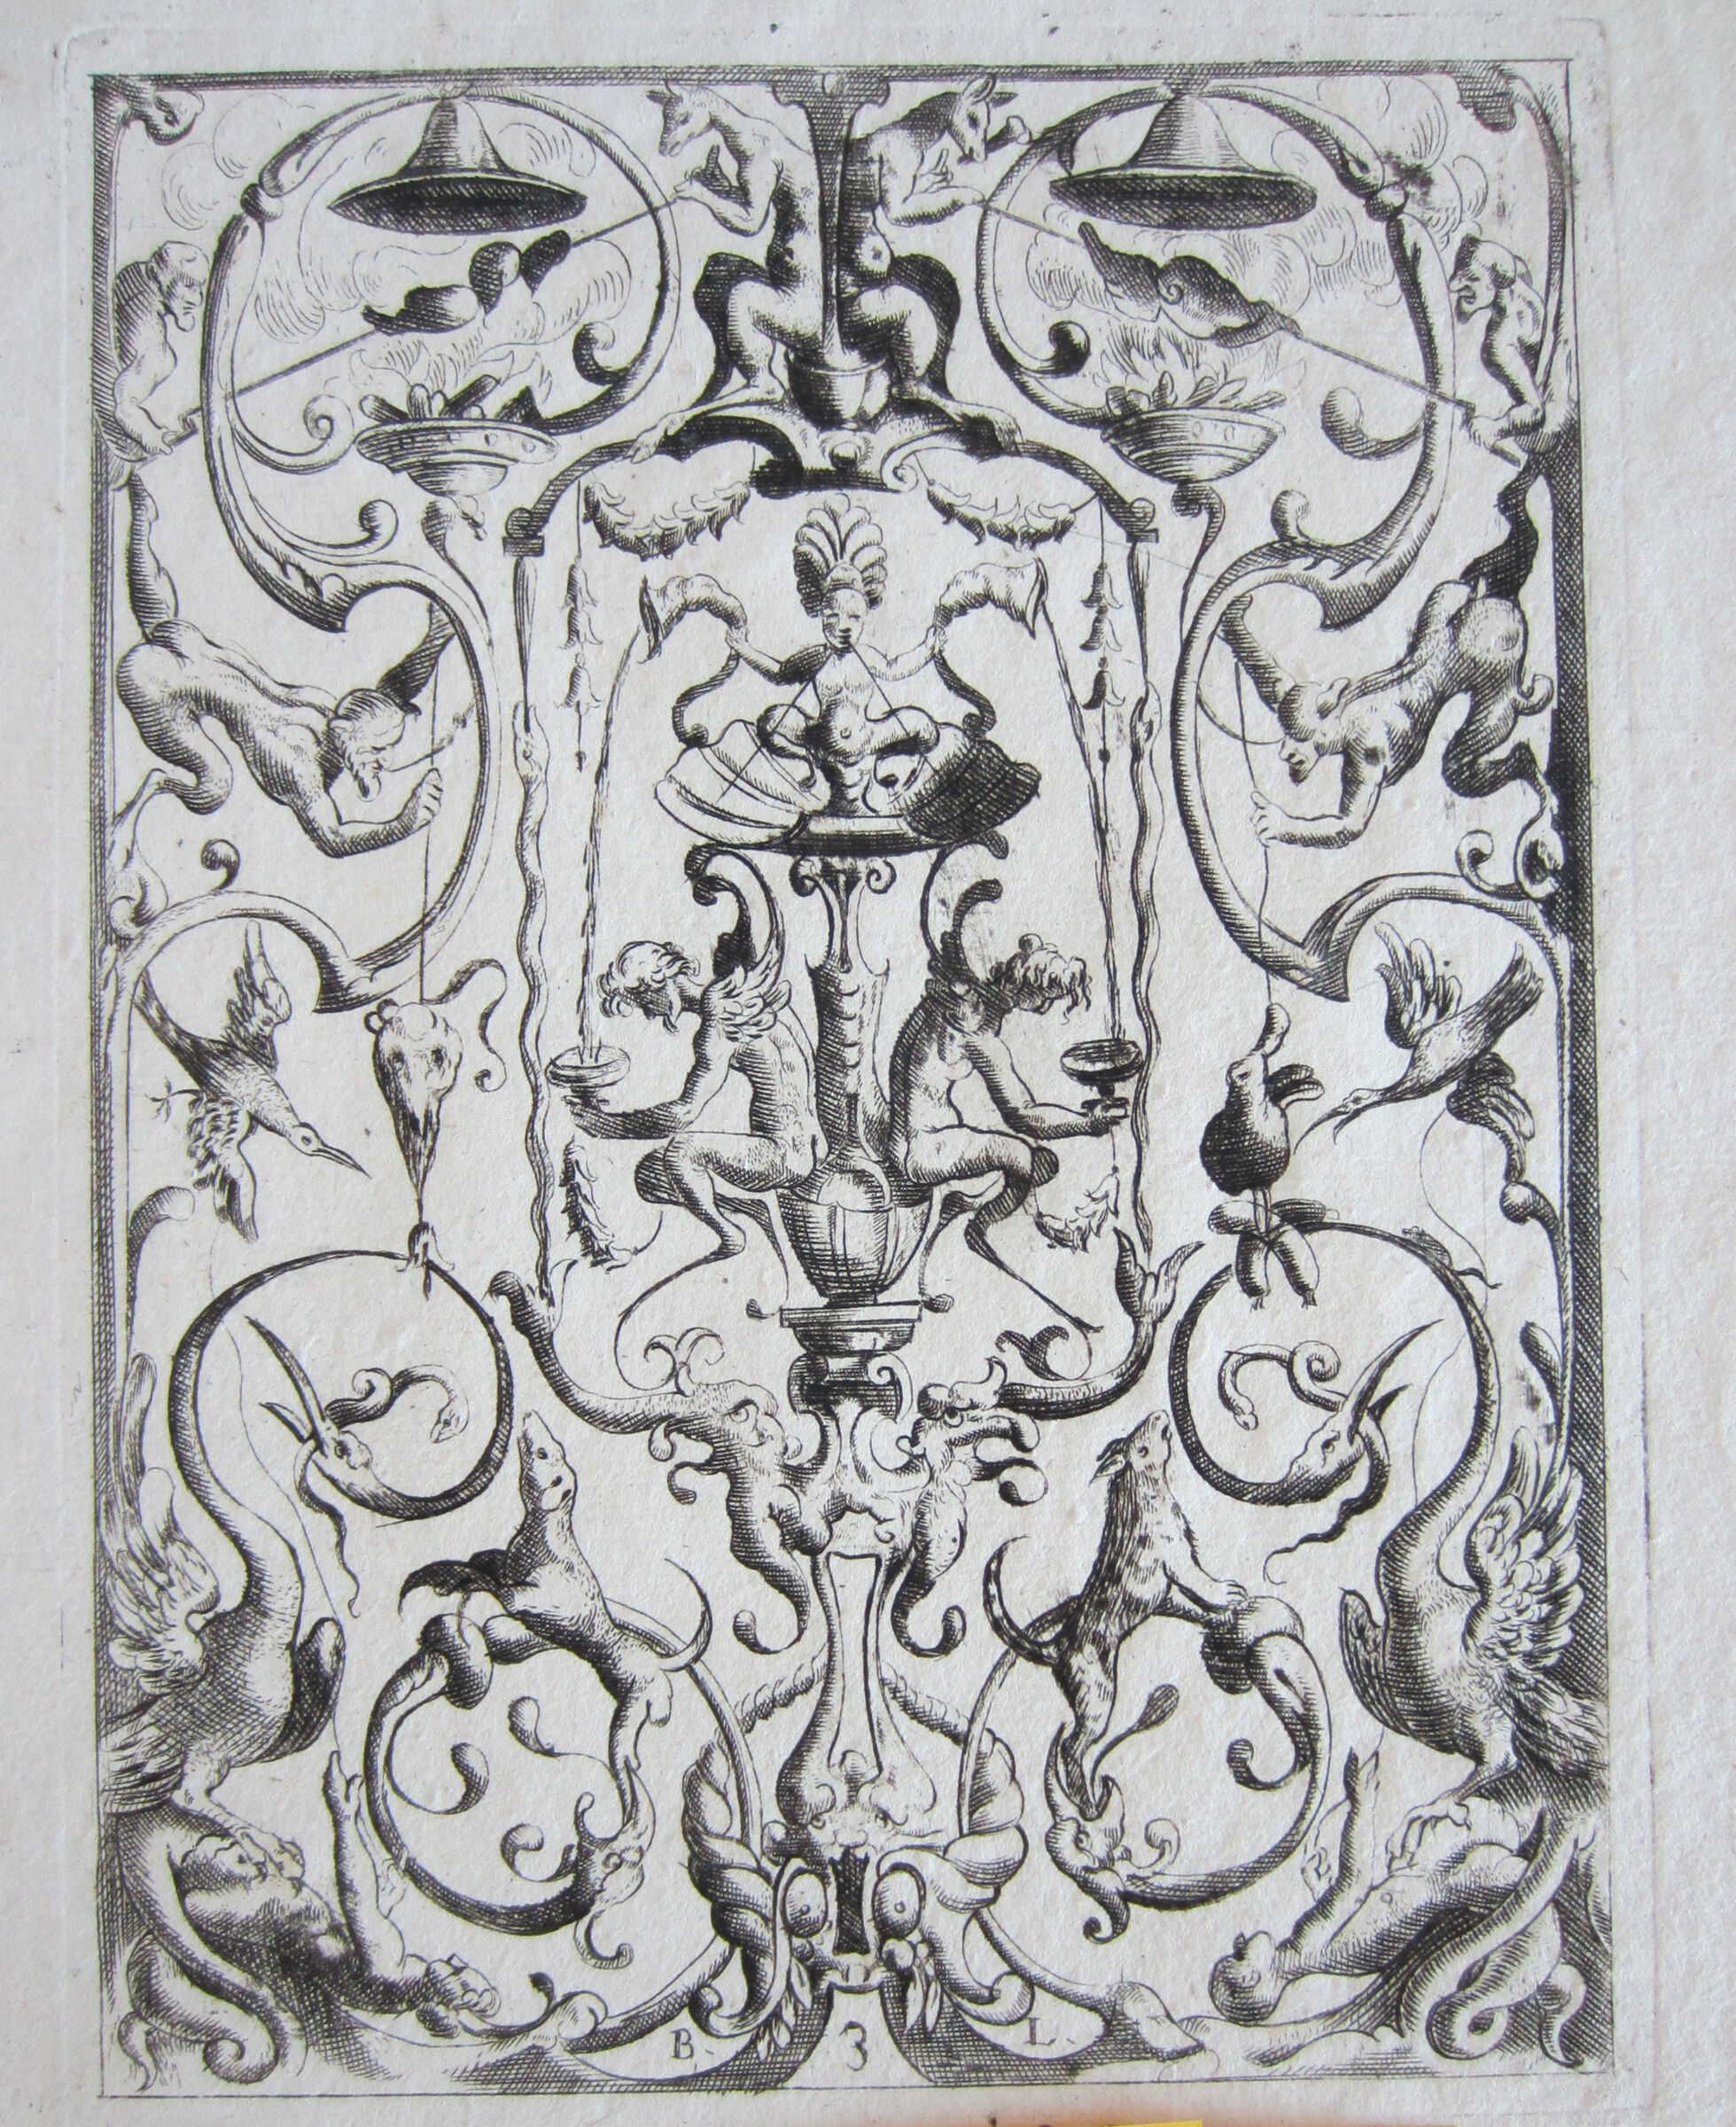 Grotesque With A Figure Seated In A Shell  Pouring Liquid Into Tazze Held By Two Winged Figures